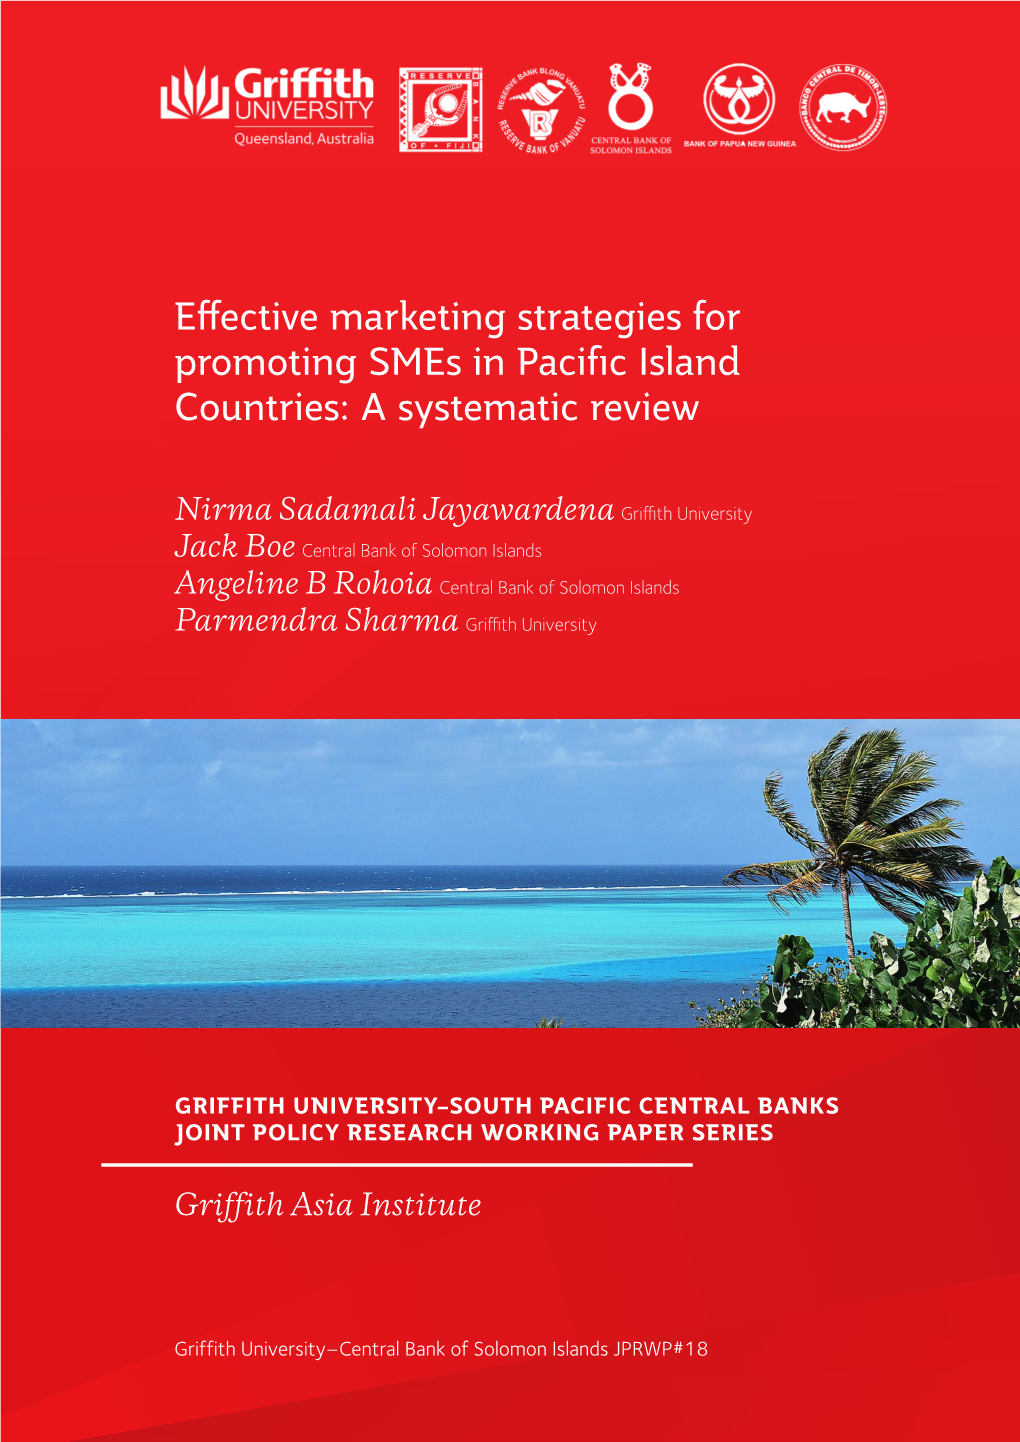 Effective Marketing Strategies for Promoting Smes in Pacific Island Countries: a Systematic Review